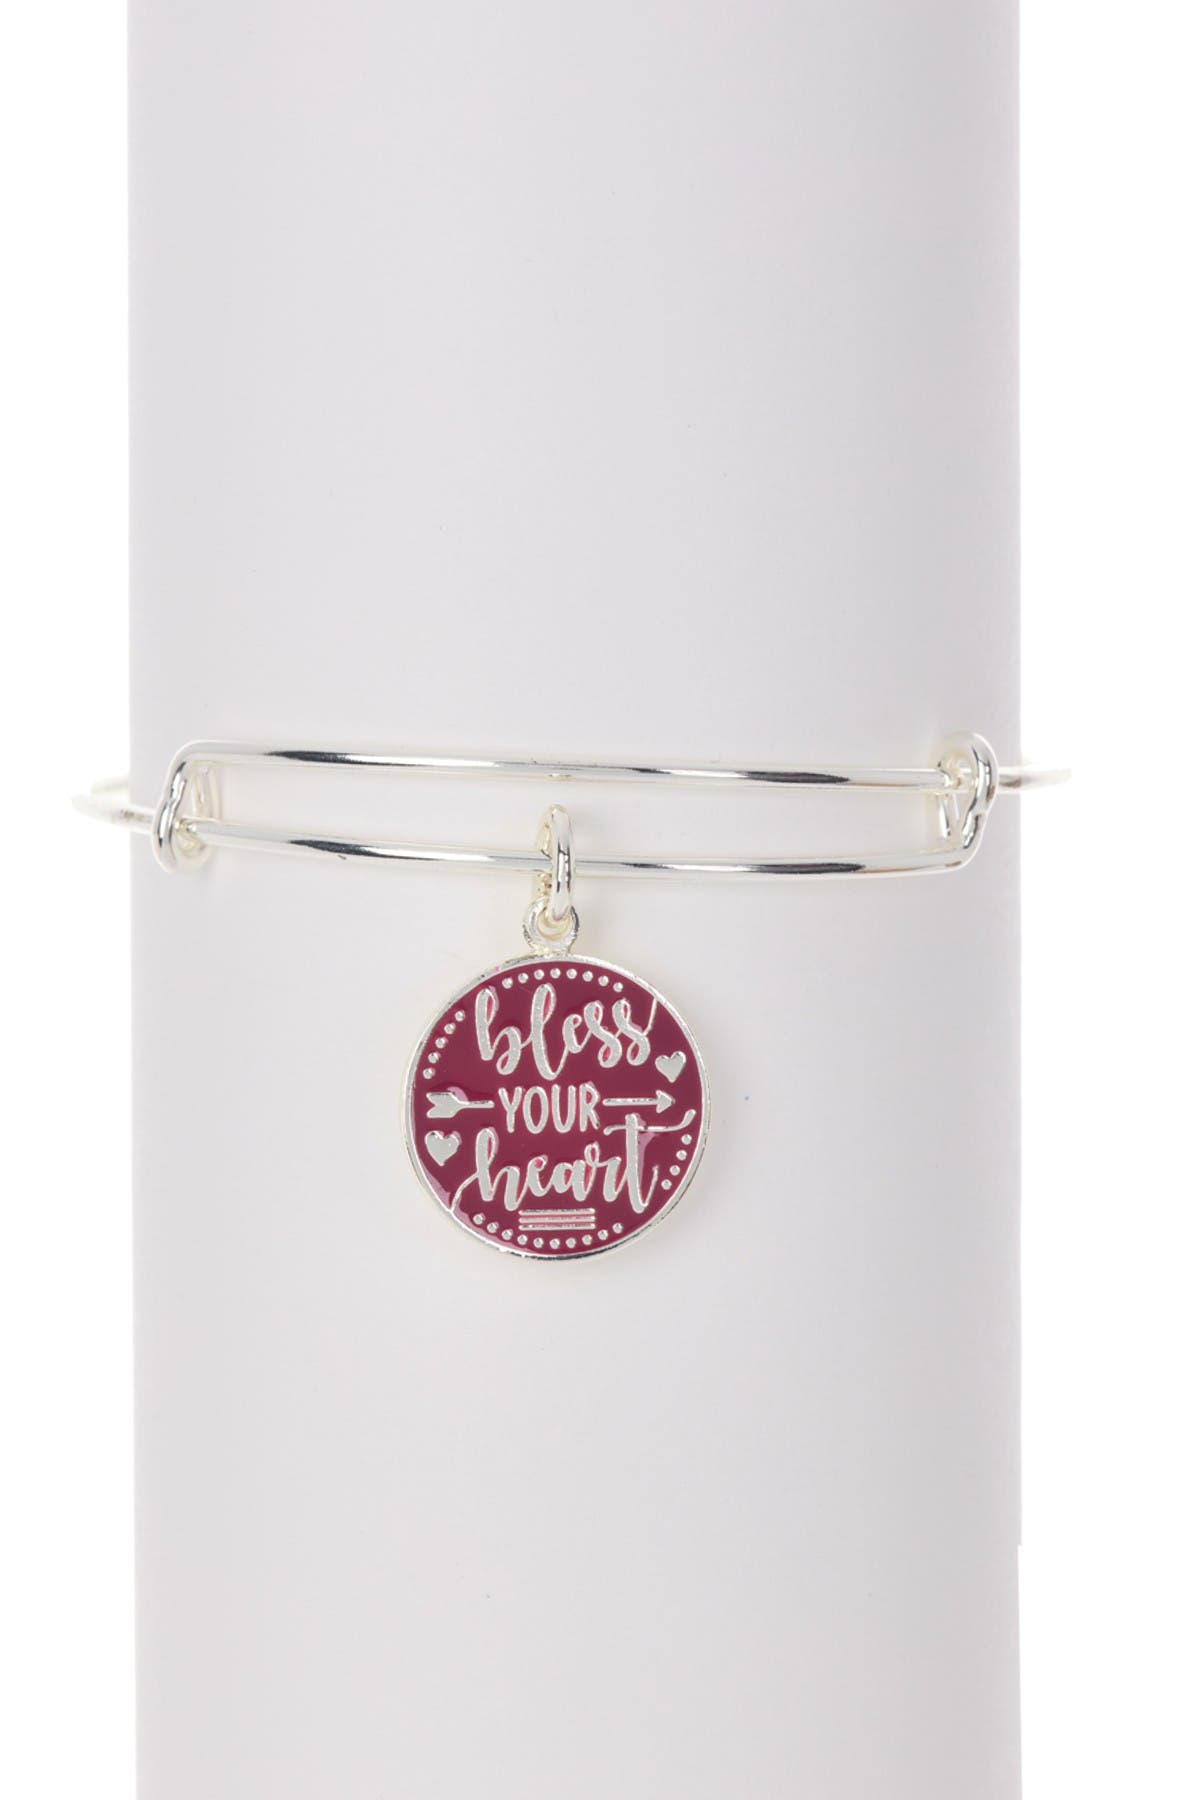 Alex And Ani Bless Your Heart Shiny Silver Finish Bangle In Silver9